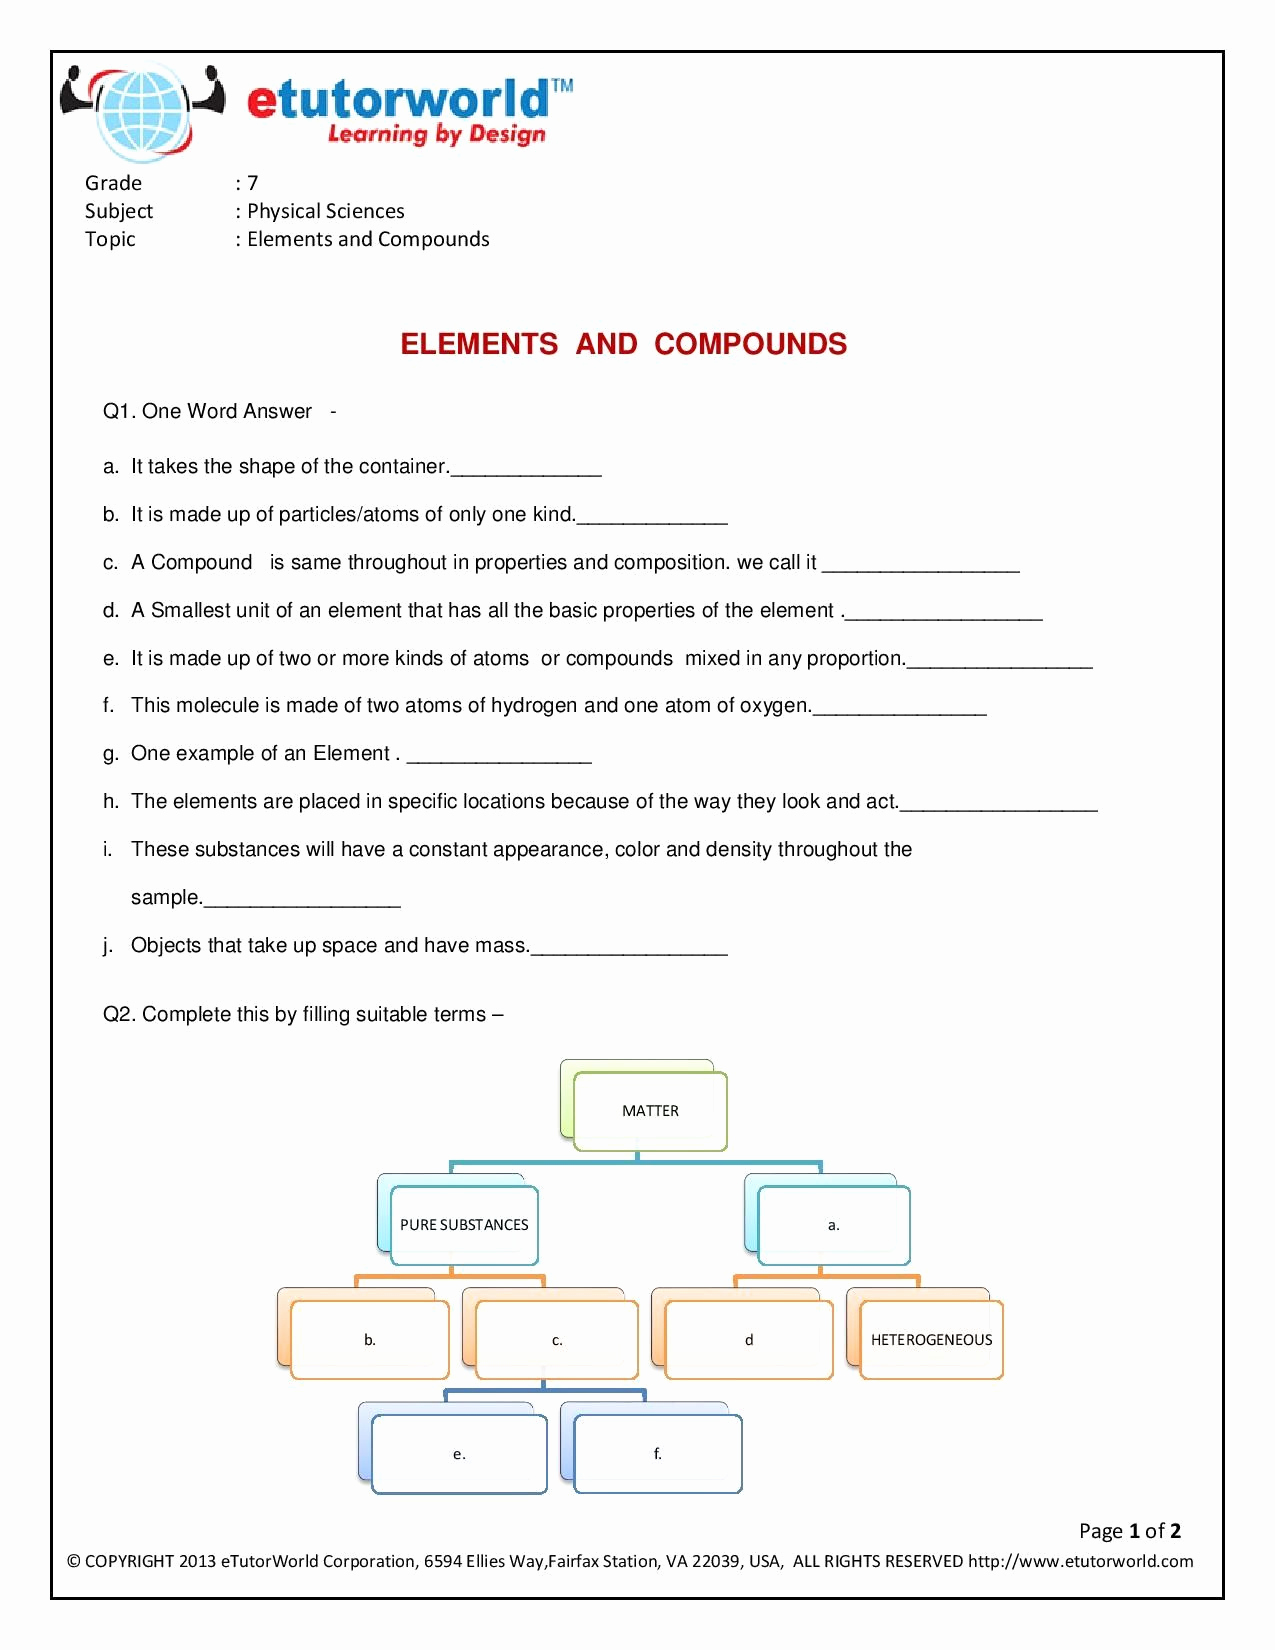 Science Worksheets for 7th Grade Luxury Science Worksheets for 7th Grade Free Printable – Learning